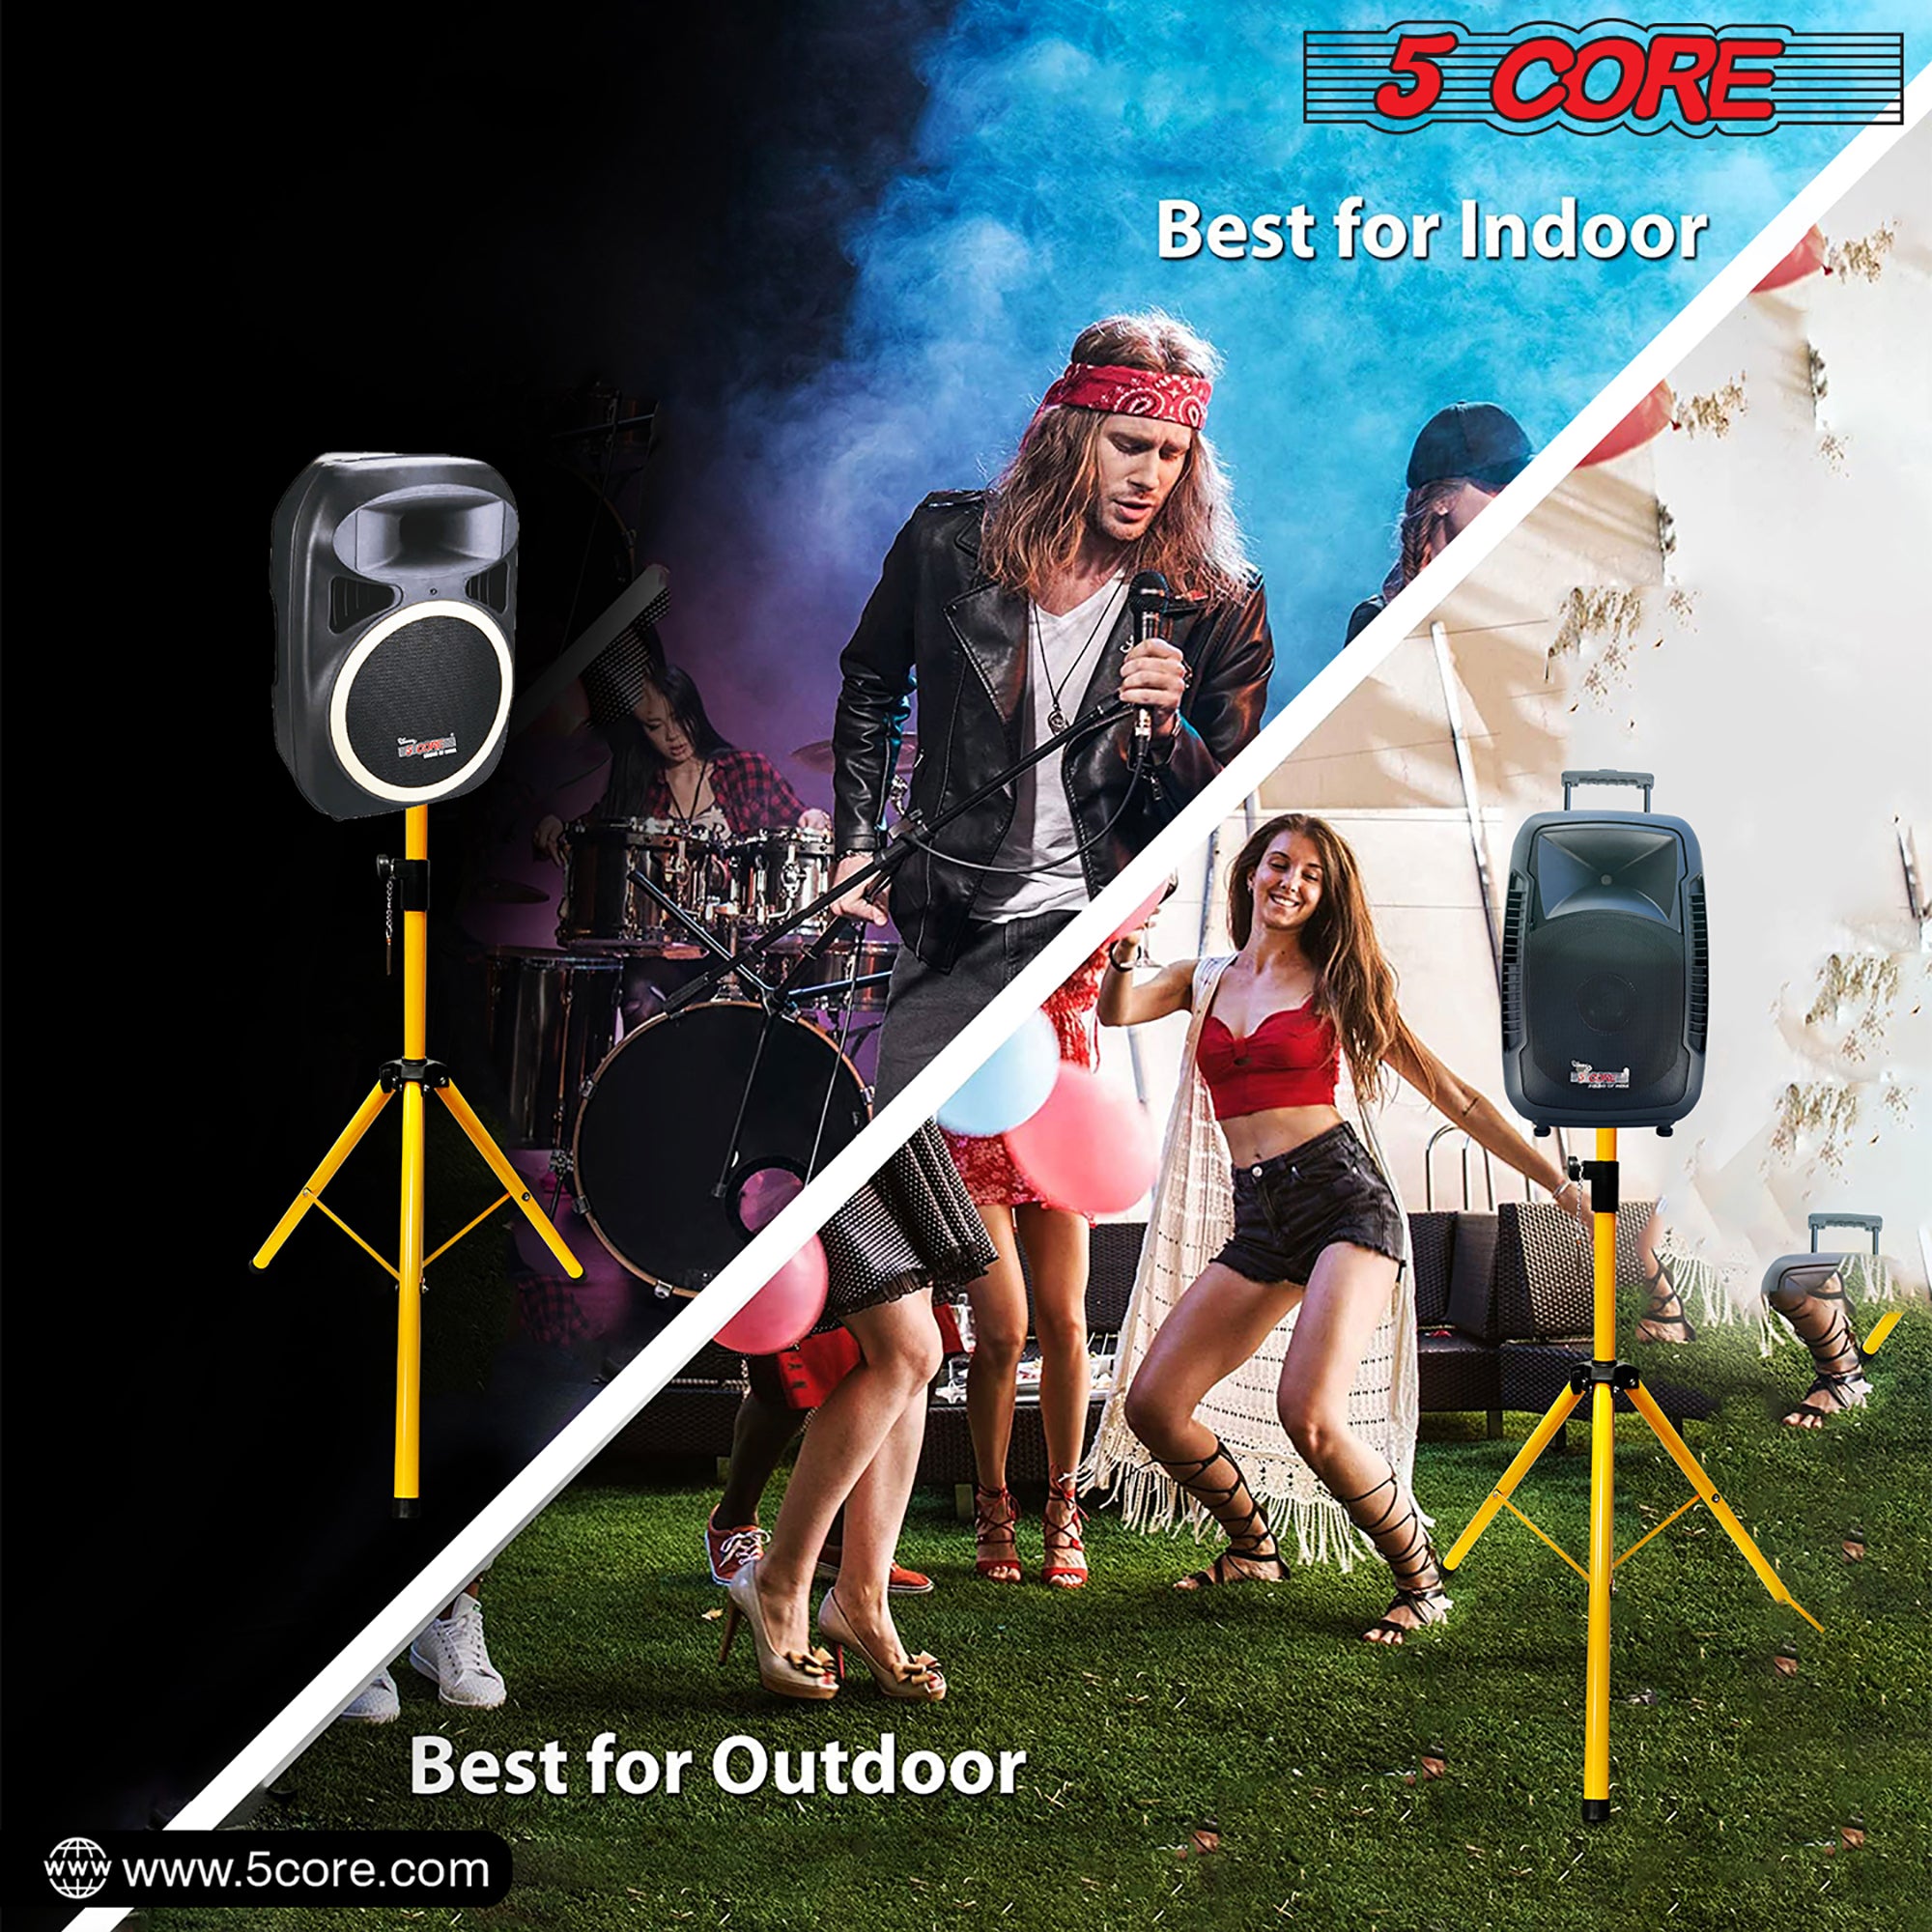 Durable construction and stability of this Speaker Stand make it suitable for any environment.